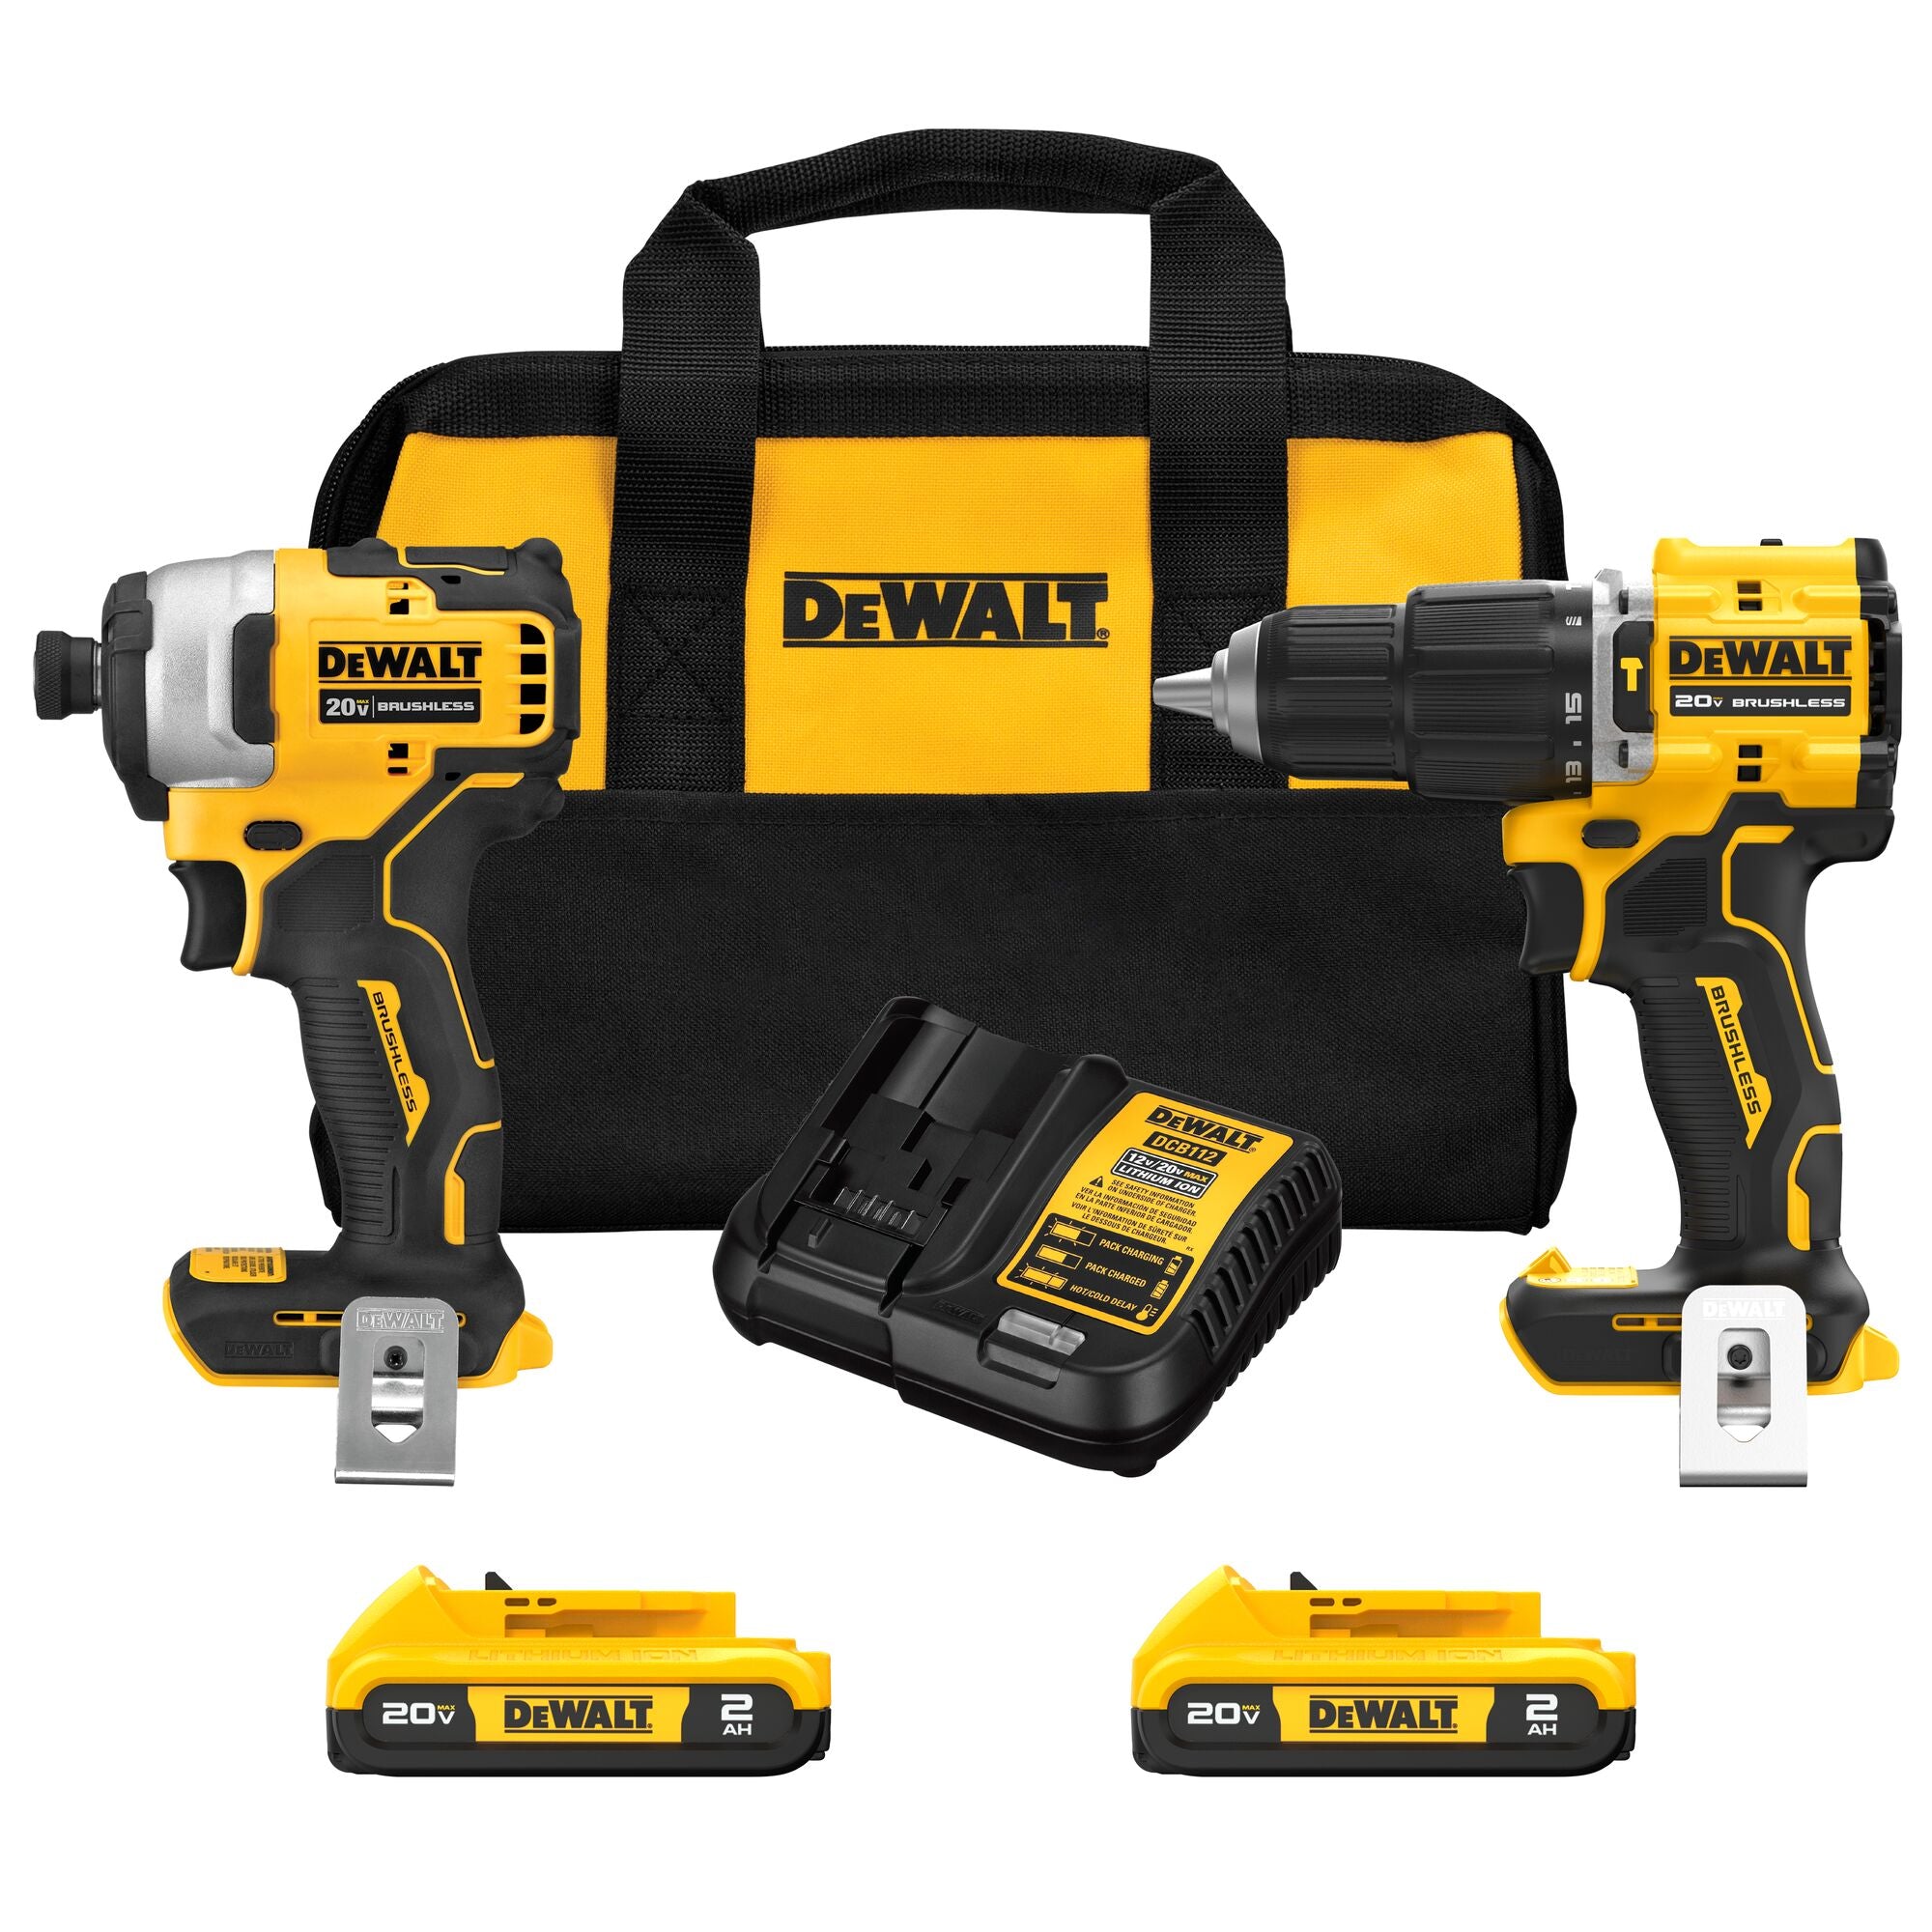 DEWALT, Dewalt 20V MAX ATOMIC Lithium-Ion Compact 1/2-inch Hammer Drill and Impact Driver Combo Kit (2-Tool)